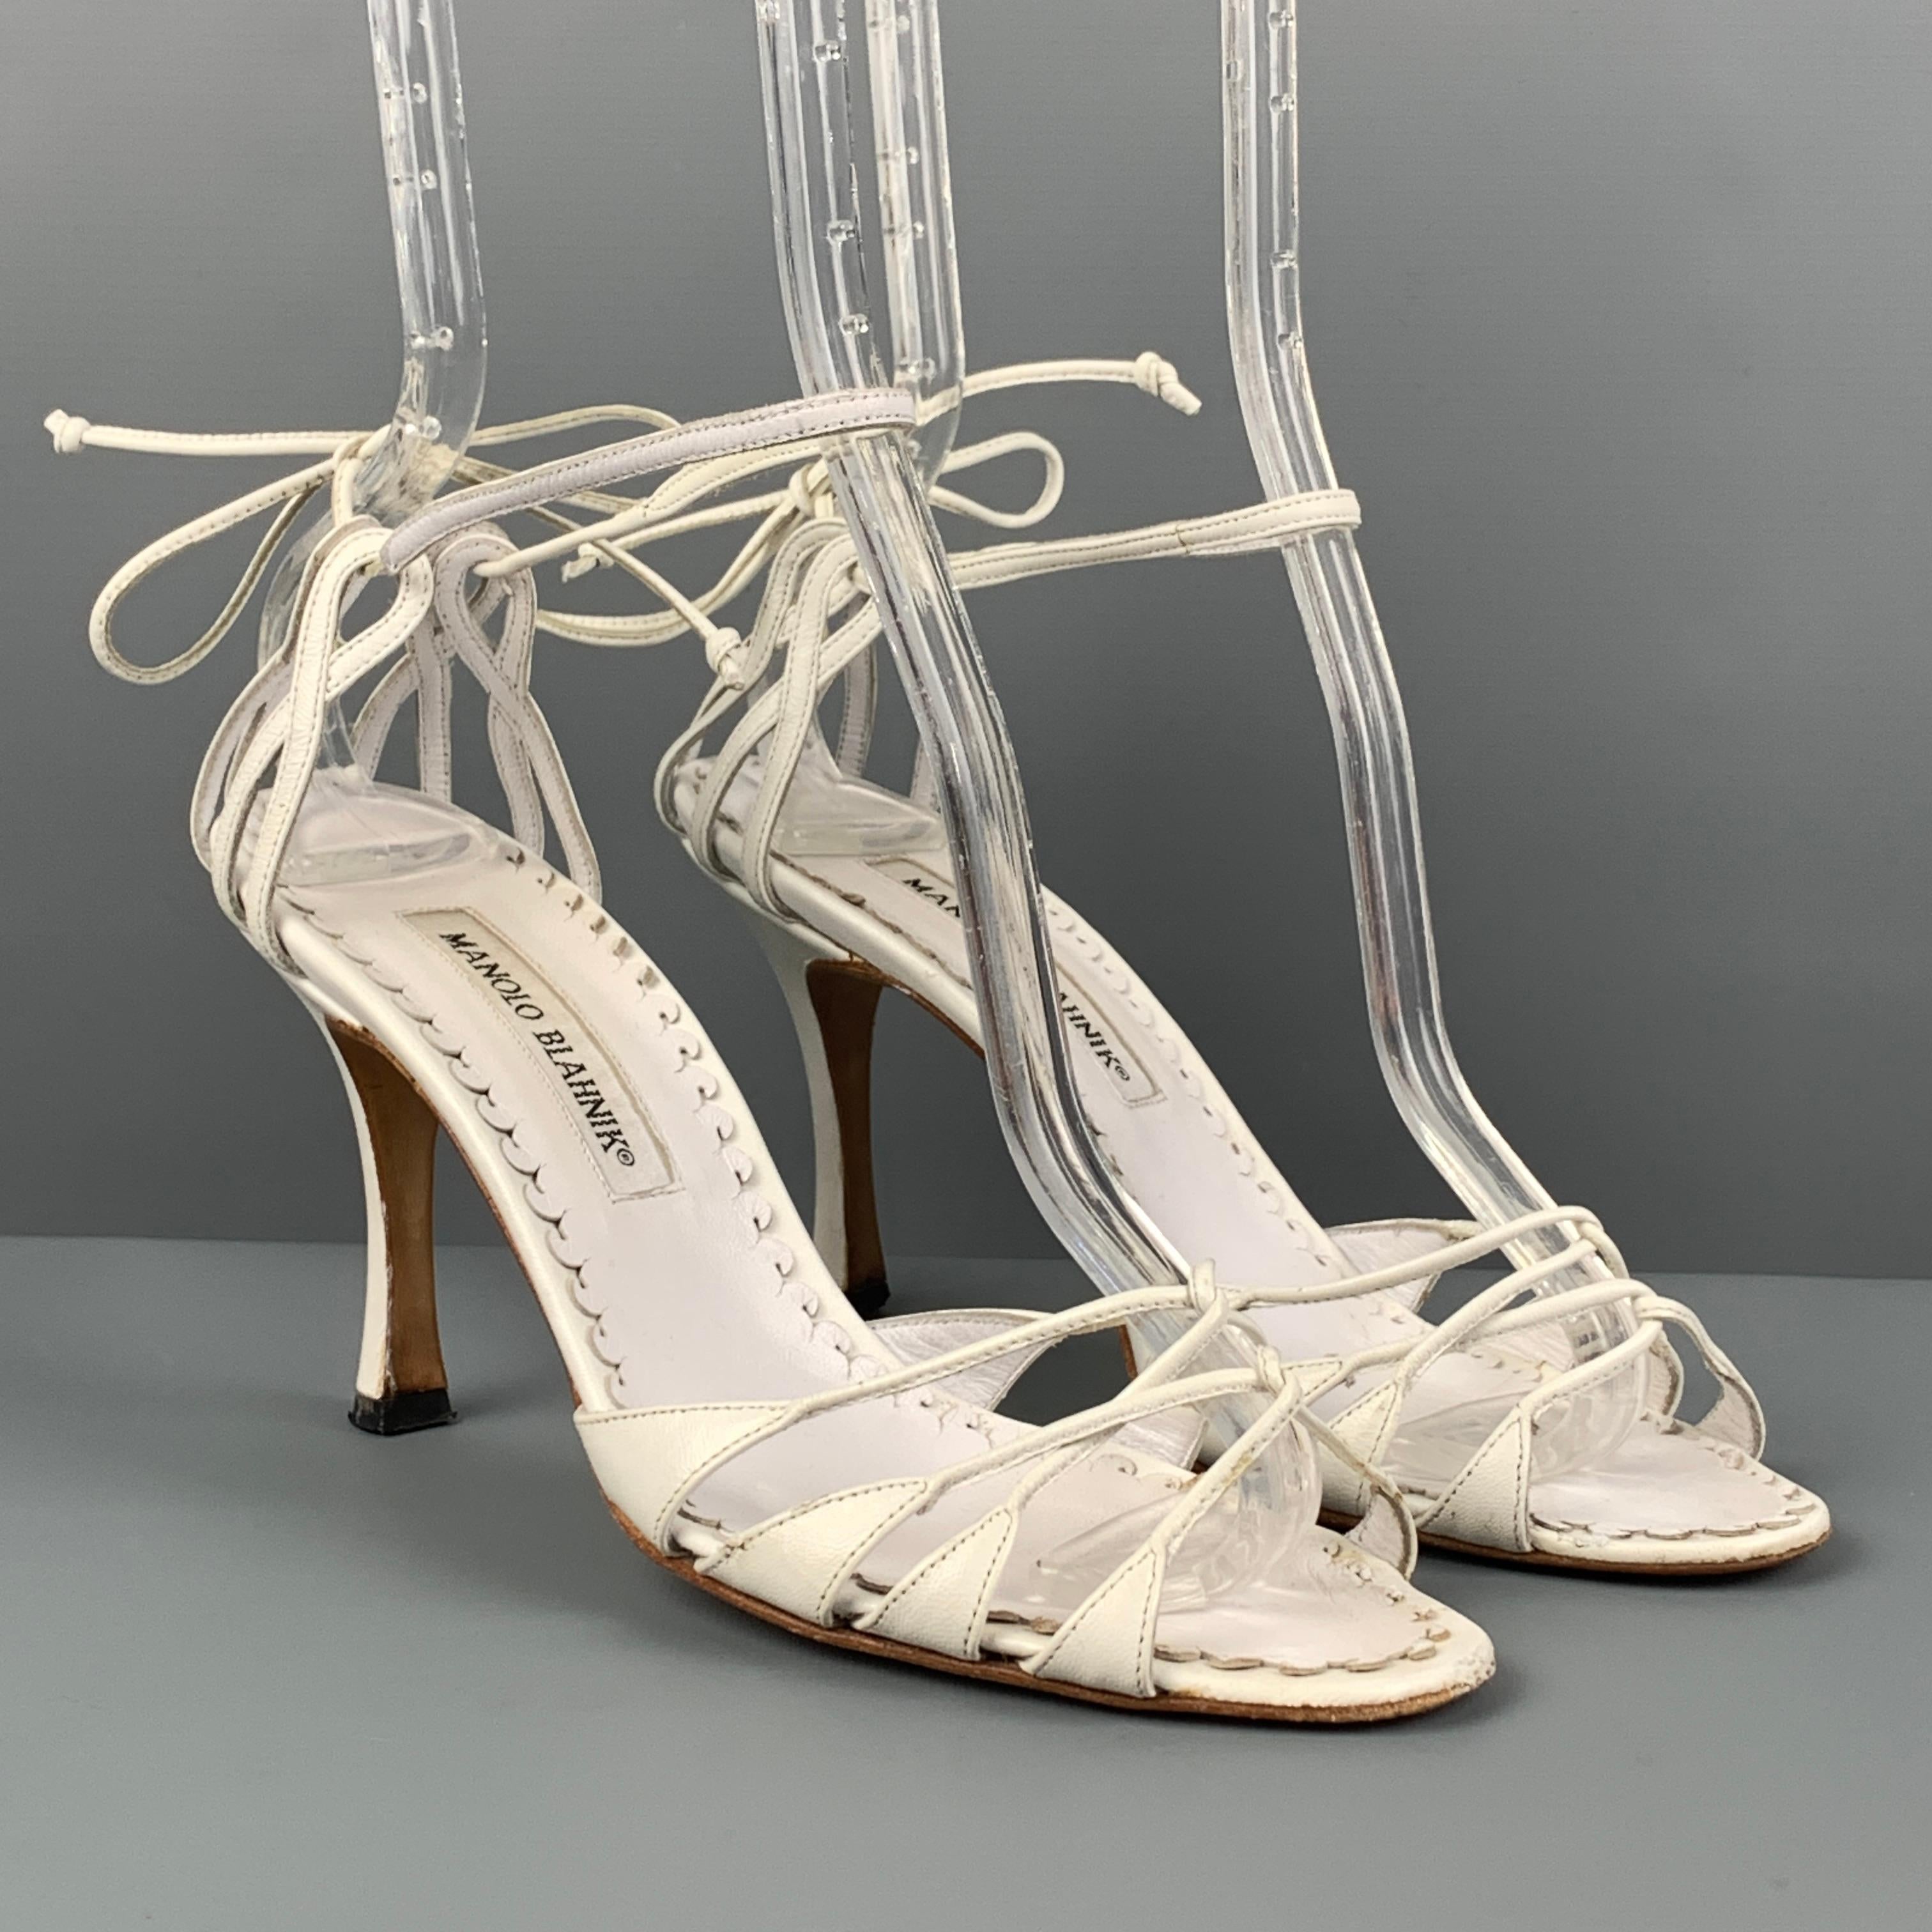 MANOLO BLAHNIK sandals comes in a white leather featuring a open toe, ankle strap, and a stiletto heel. 

Good Pre-Owned Condition. Minor wear. As-Is.
Marked: 37

Measurements:

Heel: 3.5 in. 